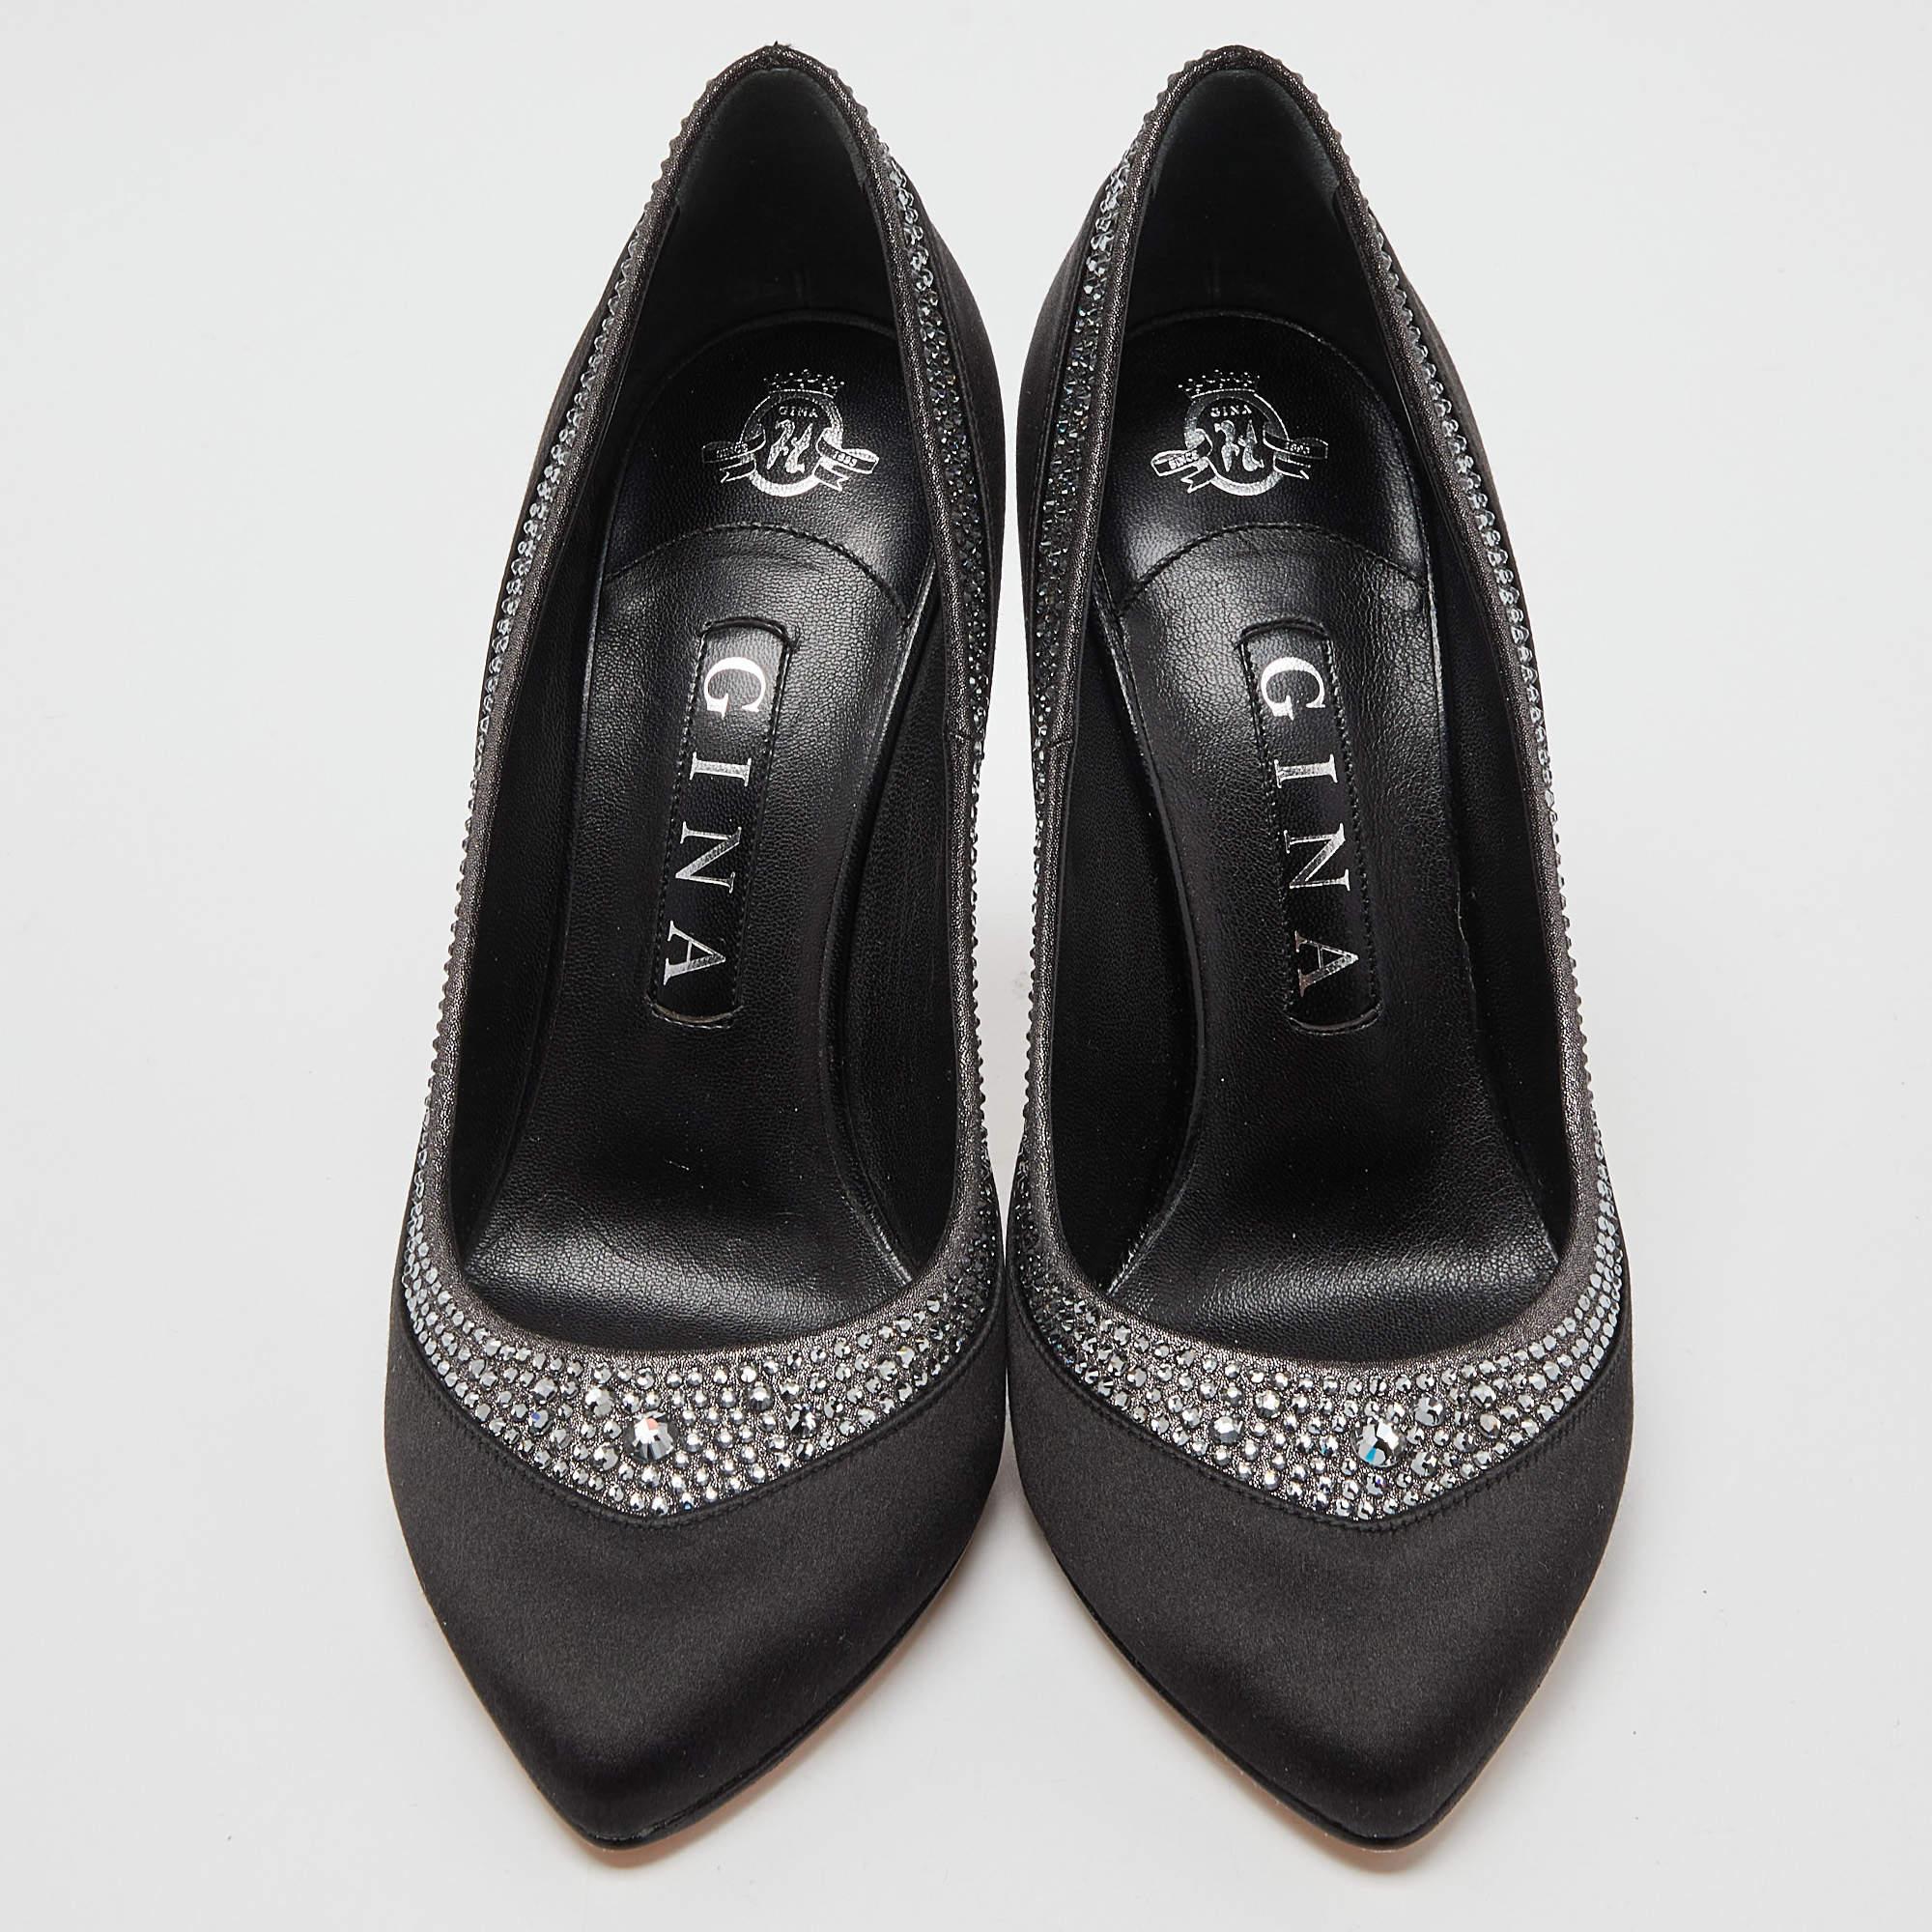 Gina Black Satin Crystal Embellished Renee Pumps Size 38.5 In New Condition In Dubai, Al Qouz 2